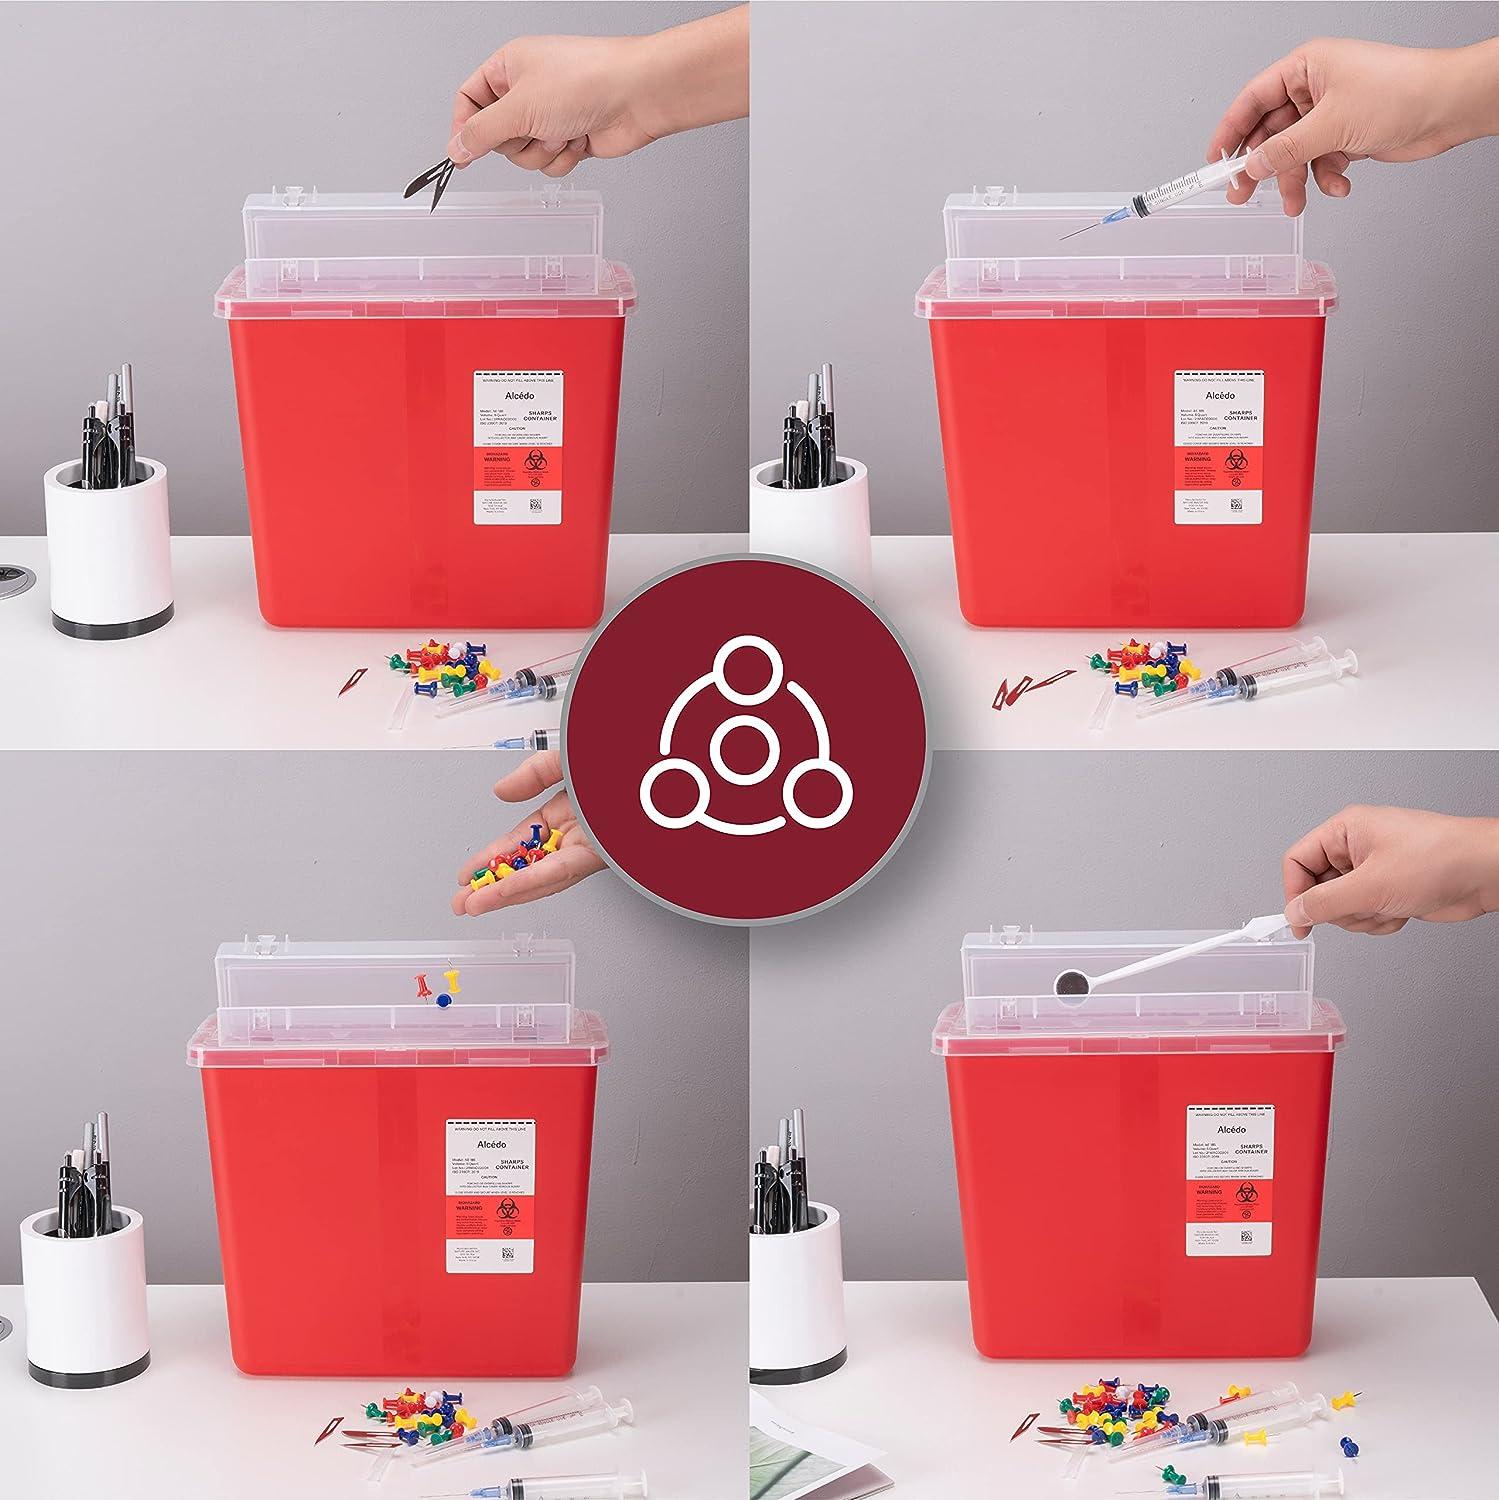 Alcedo Sharps Container for Home Use 2 Gallon 2-Pack Biohazard Nee